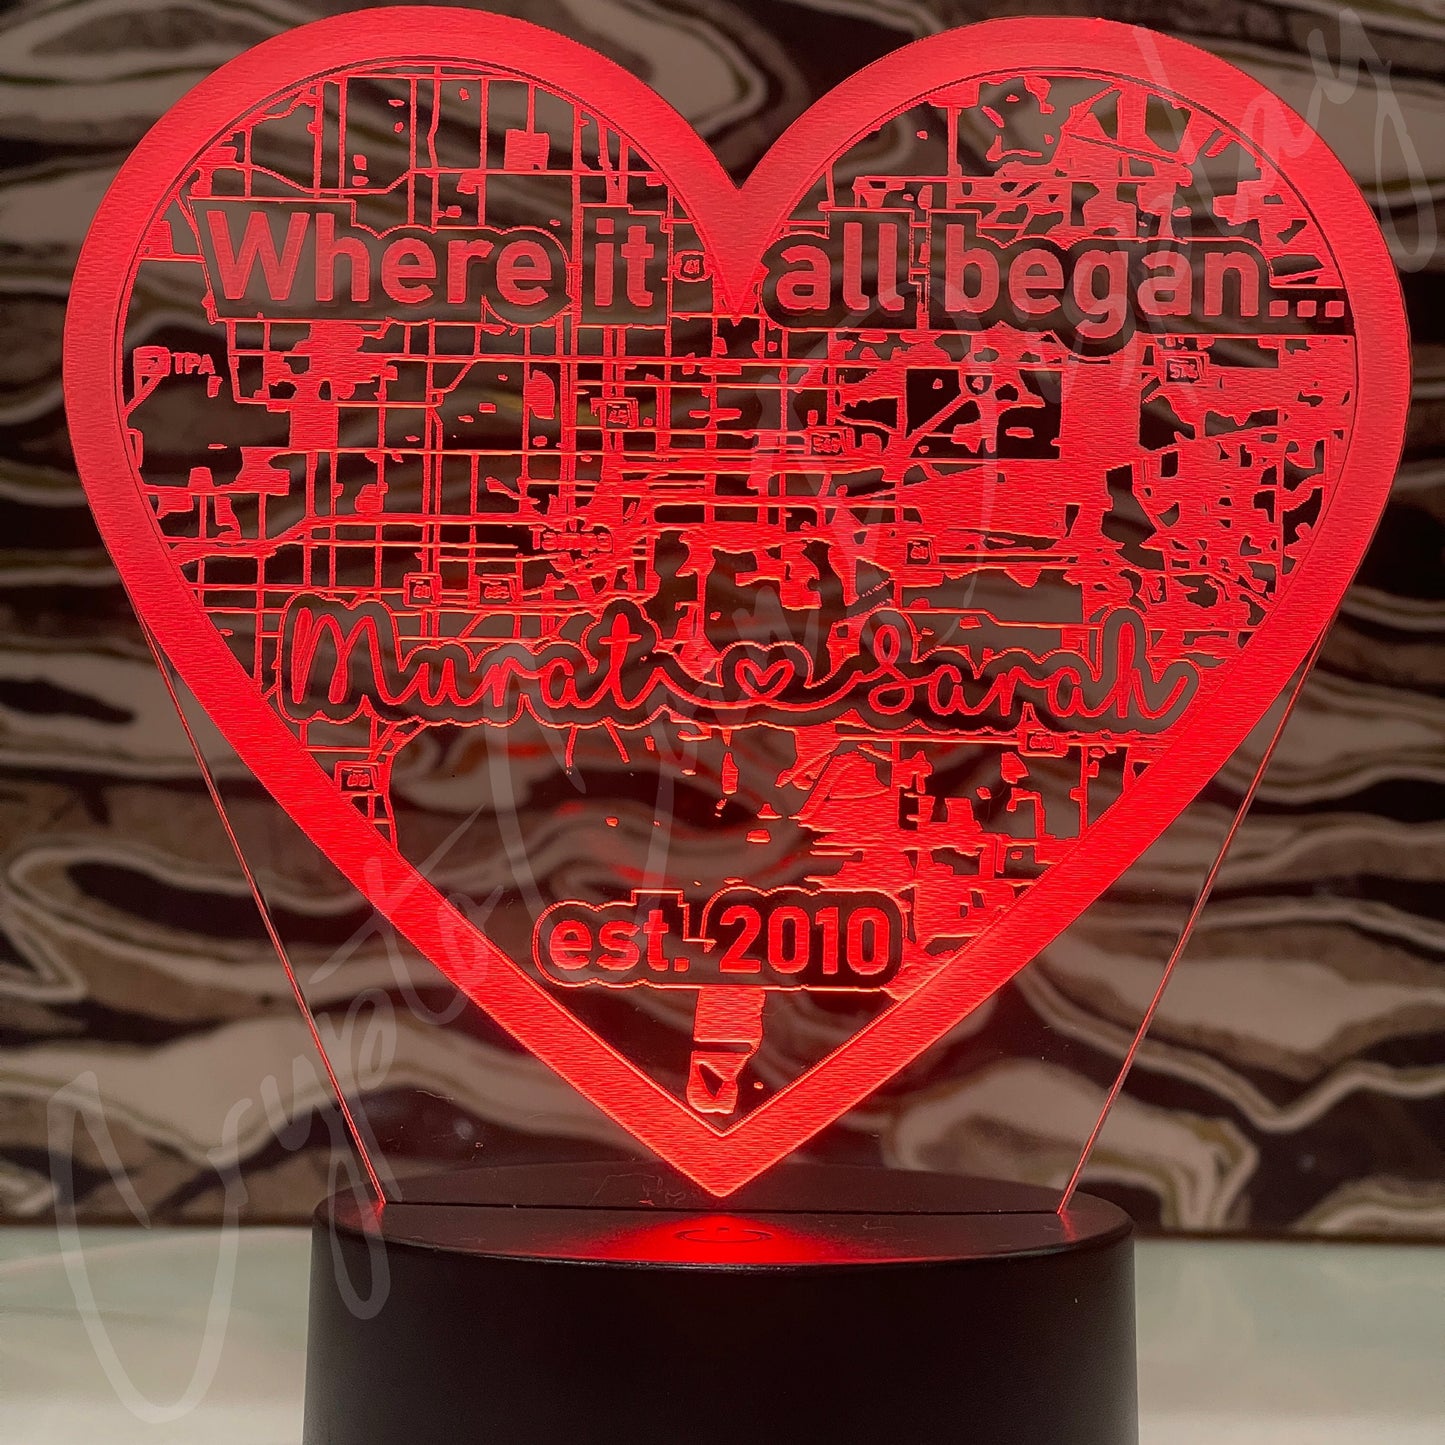 Where it all began.. Heart Acrylic Sign | Heart Night Light | Valentines Day Gift | Love Heart Sign | Heart Plaque | City Night Light - Crypto Coin Display